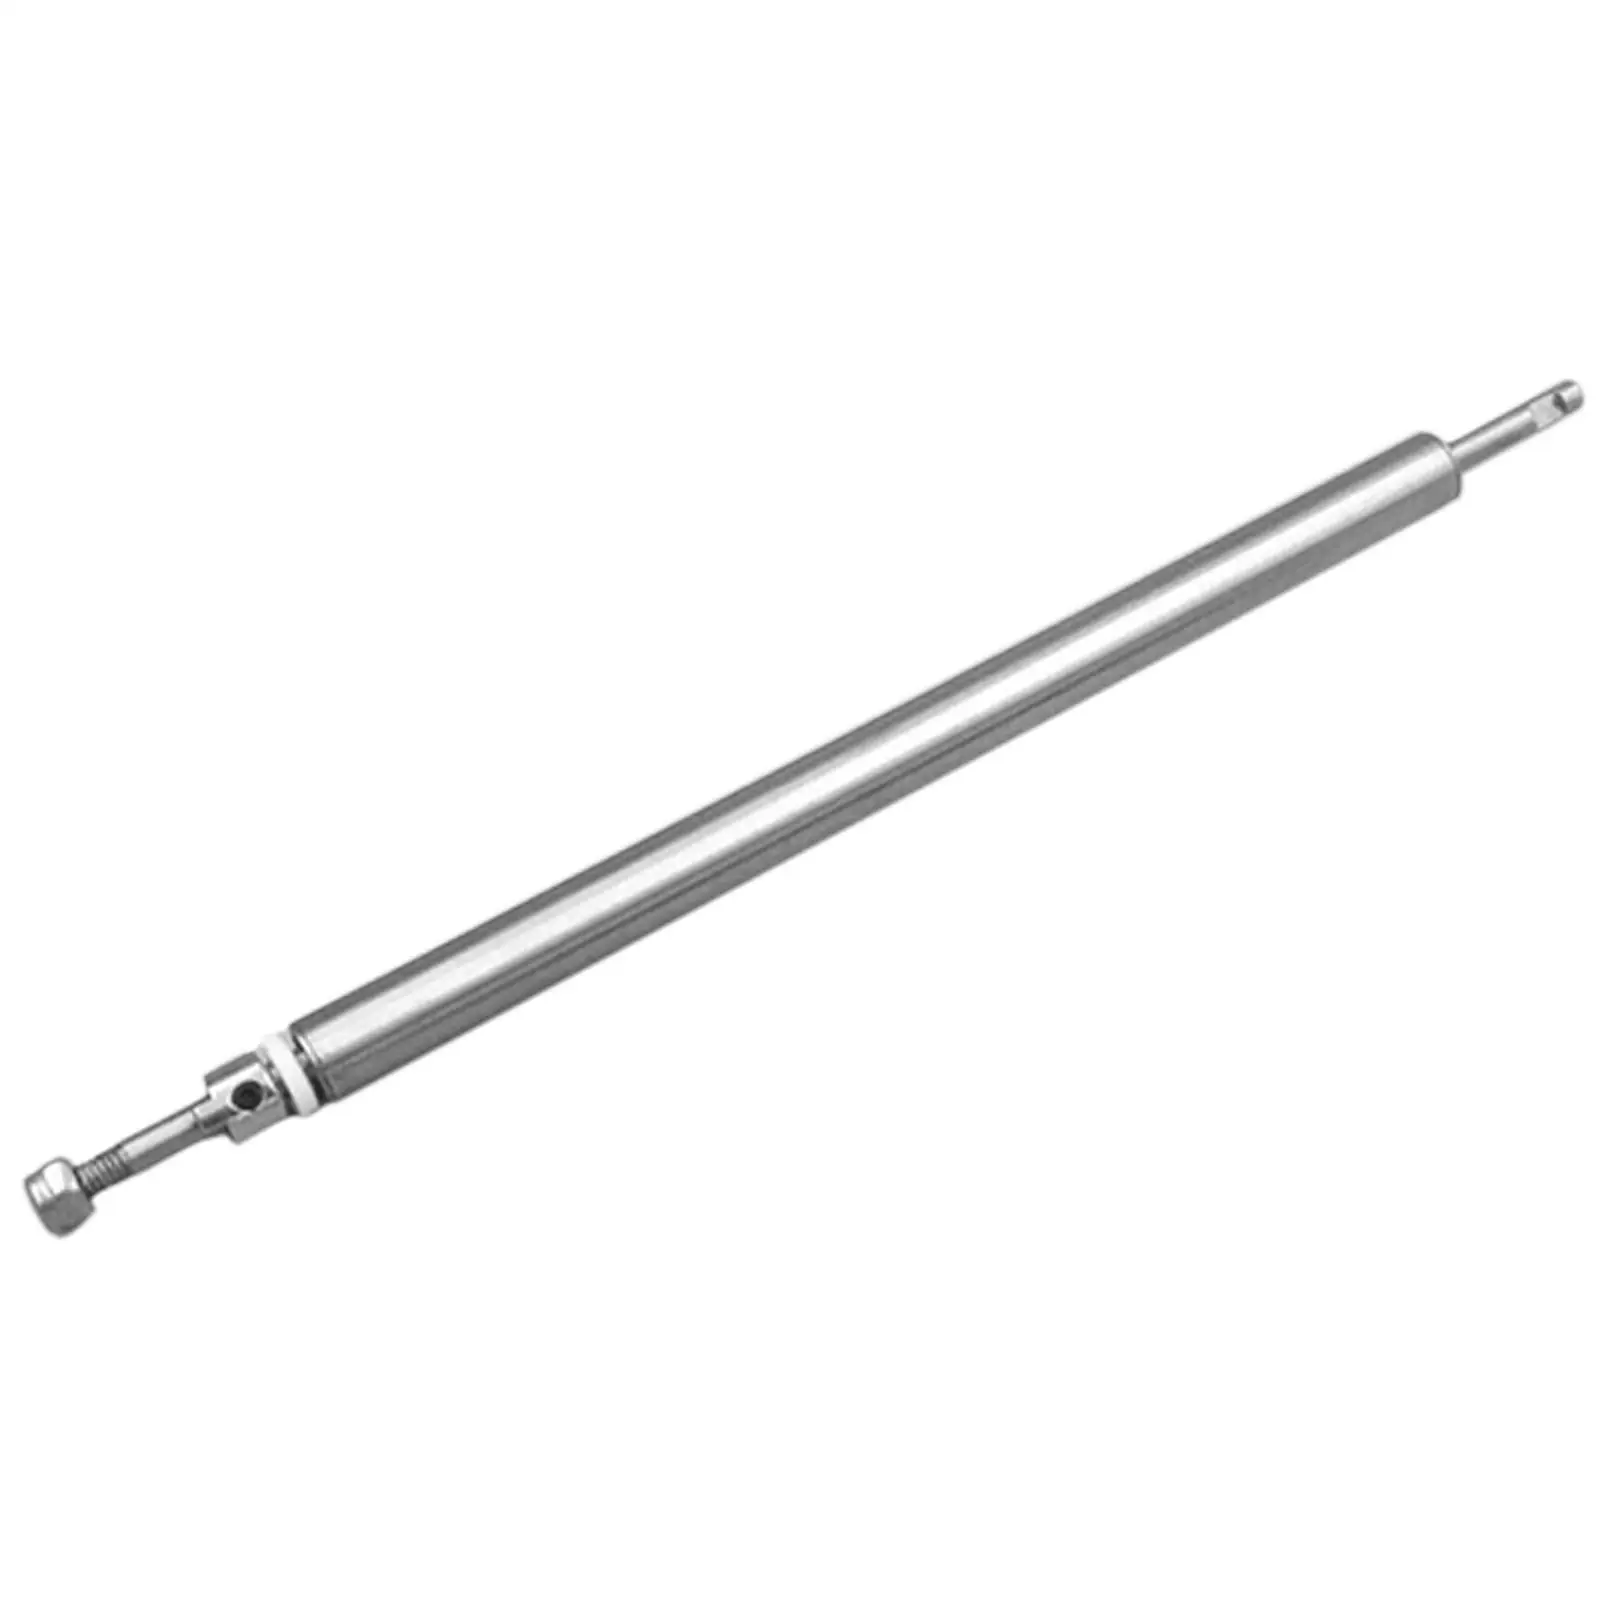 RC Boat Drive Shaft RC Boat 3mm Boat Shaft Kit for Toys Boat Replacements